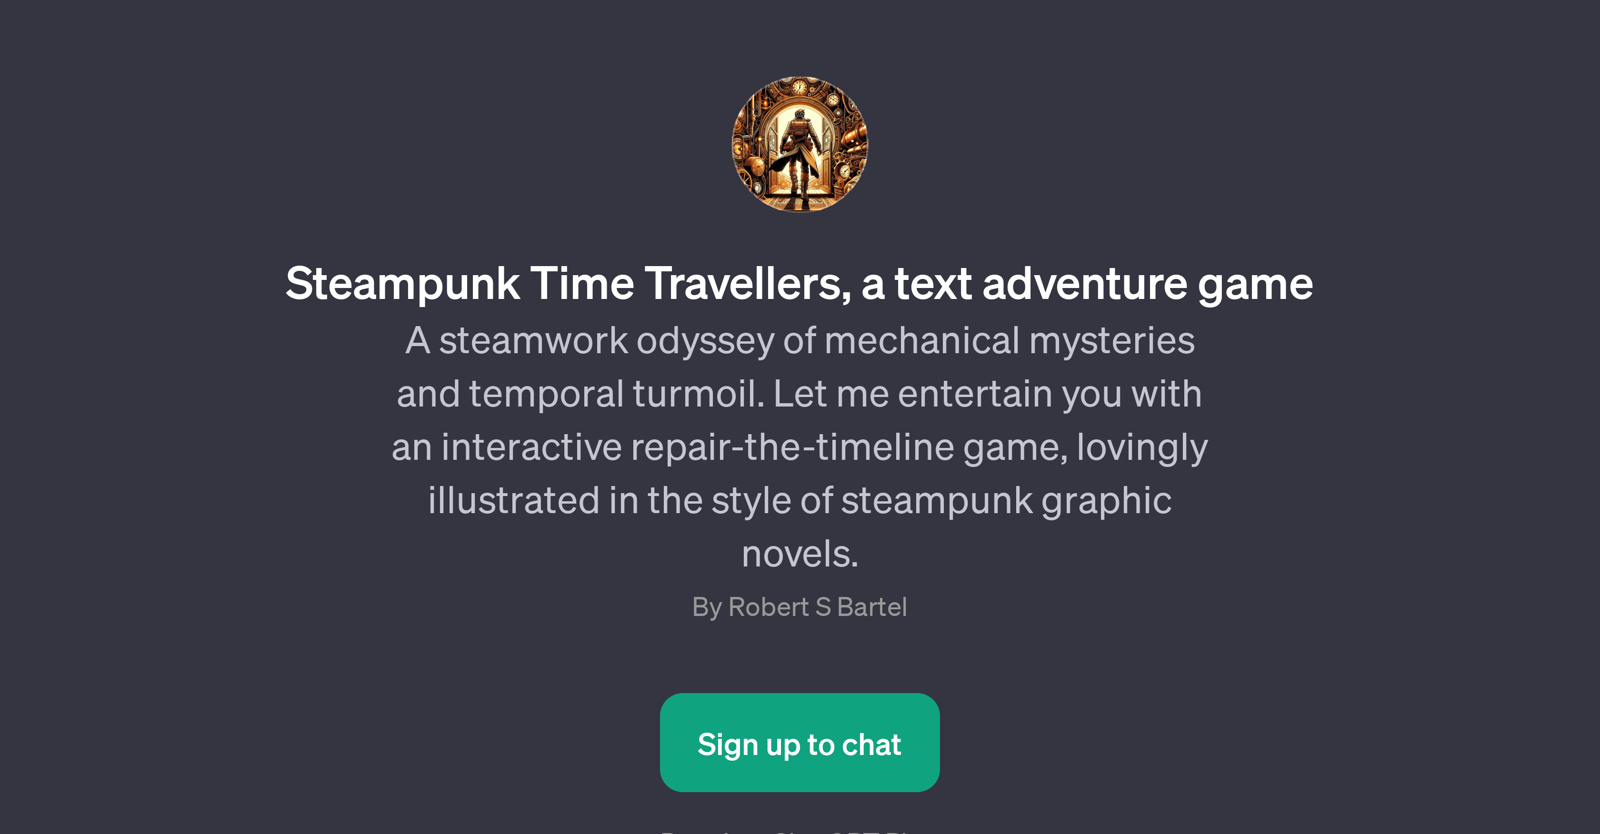 Steampunk Time Travellers website